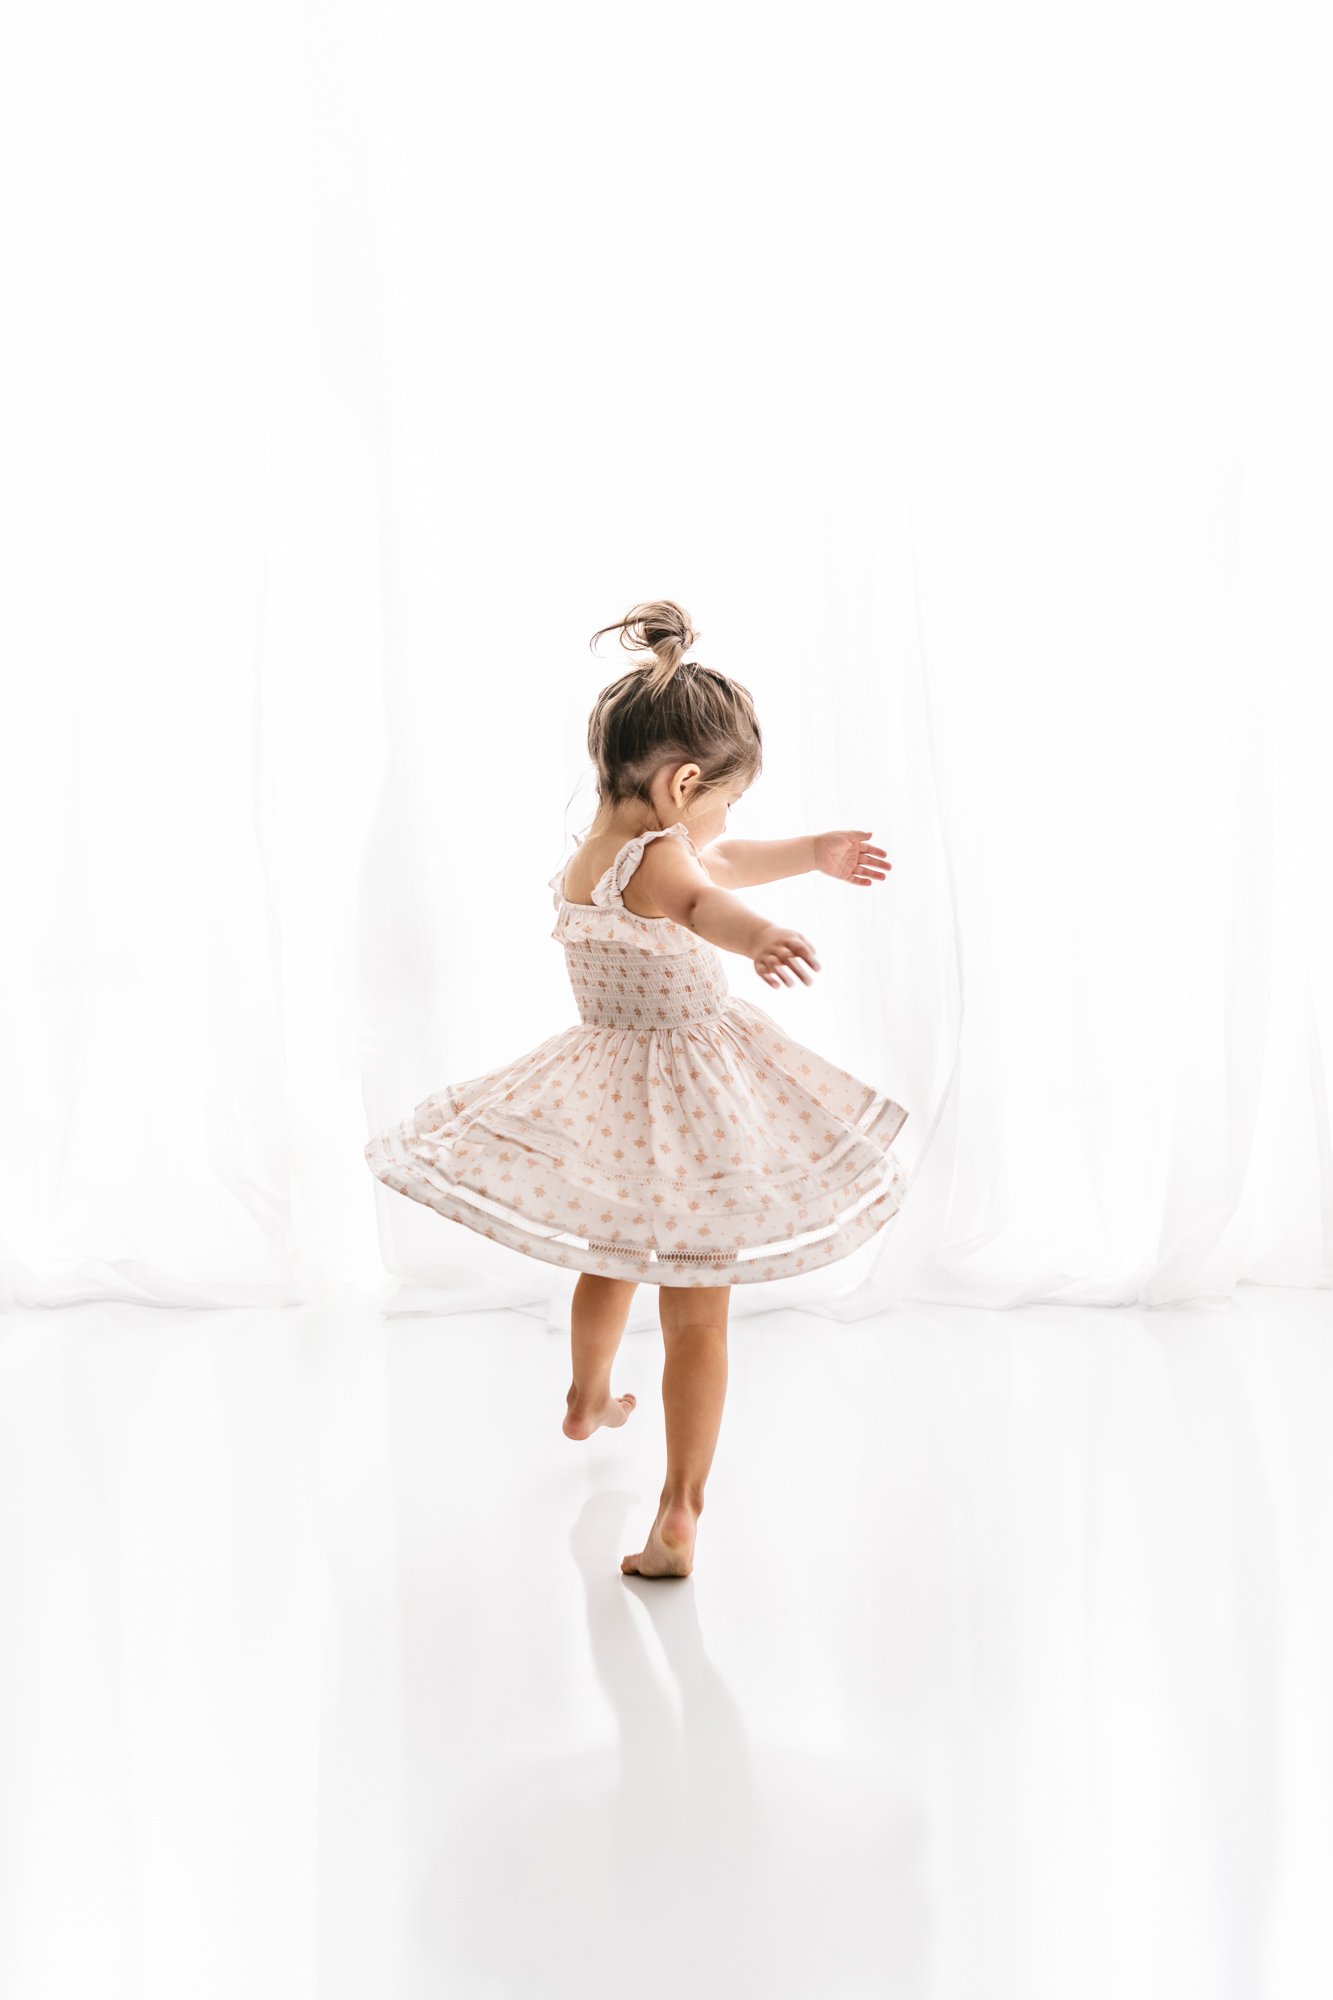  A timeless portrait of a little girl twirling around dancing in her dress captured by Nicole Hawkins Photography. little girl dancing top knot little girl dancing portrait in studio #NicoleHawkinsPhotography #NicoleHawkinsMaternity #MaternityStudioP